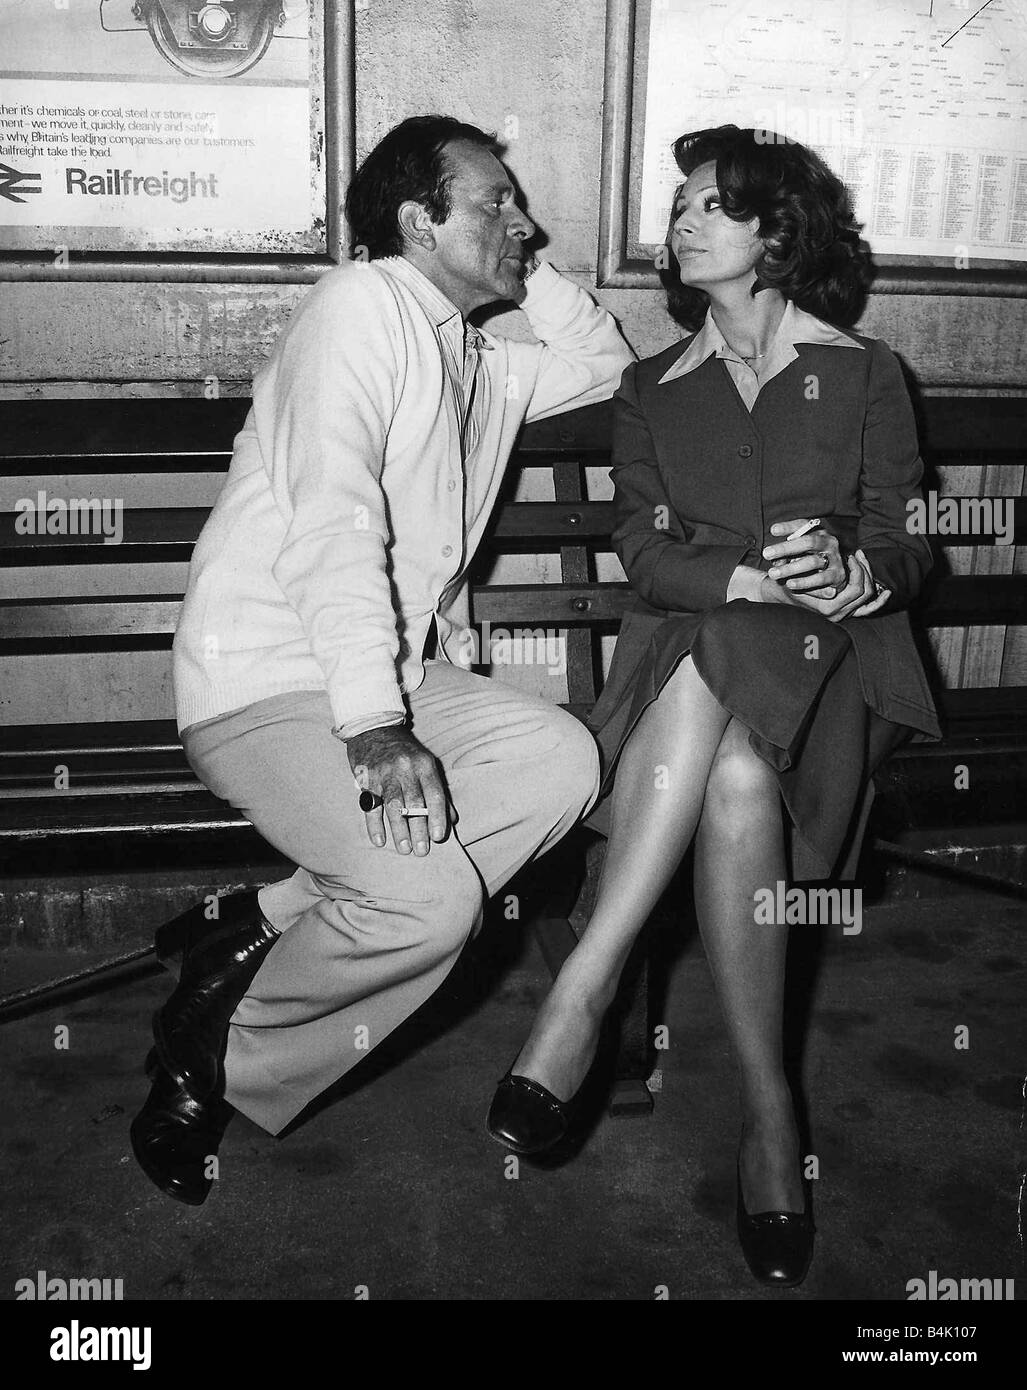 Richard Burton with Sophia Loren on a bench at a train station filming the play brief encounter July 1974 Stock Photo